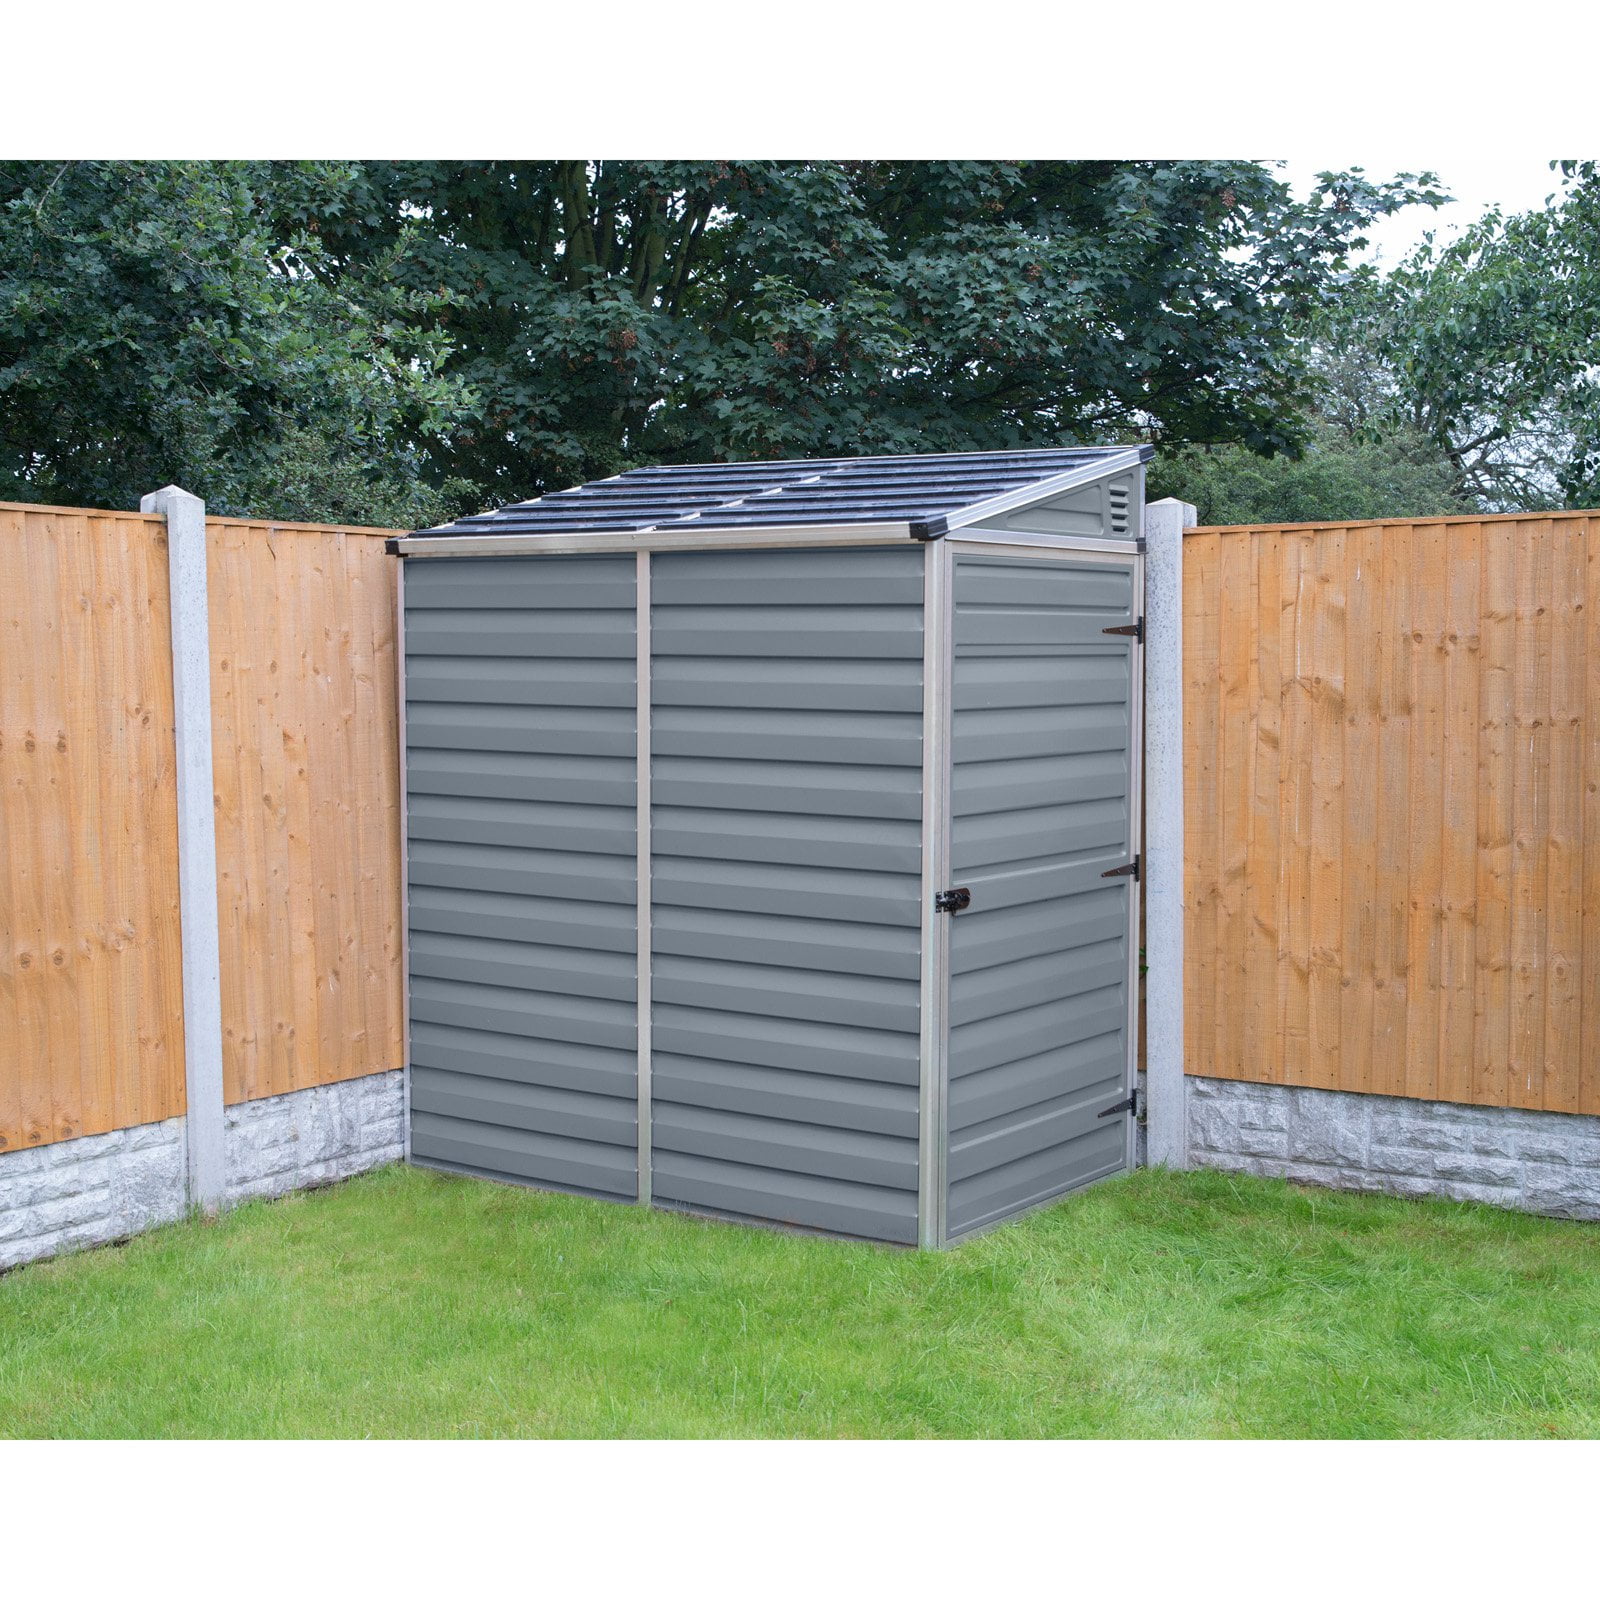 Metal Shed stock illustrations